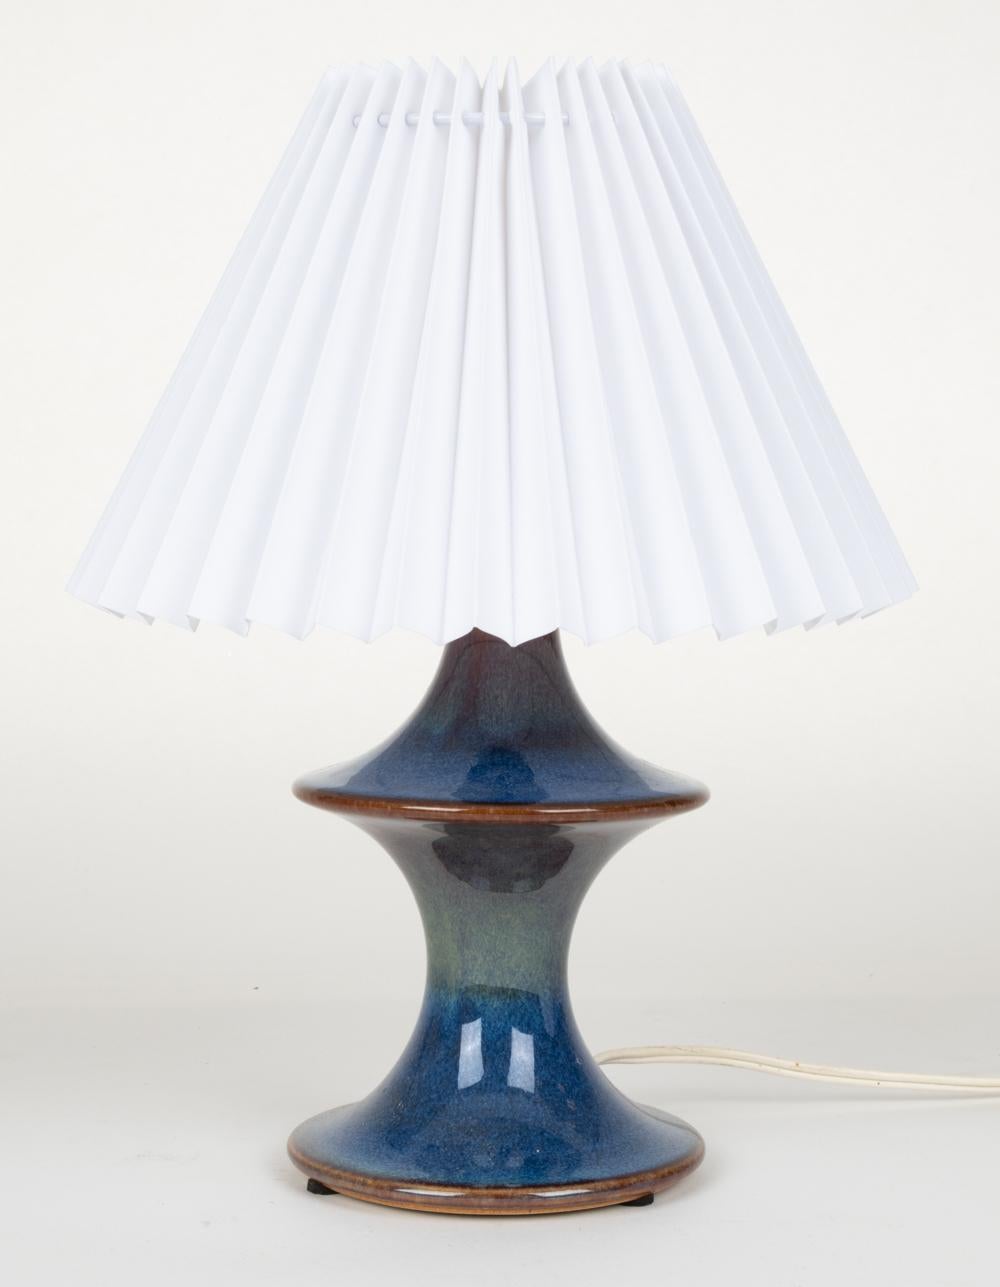 A Scandinavian mid-century petite shaped table lamp in ceramic with a glossy mottled blue multi-tone glaze. An unusual and rare form, designed by Einar Johansen for Soholm Stentoj, circa 1960s. Marked underneath. 
Lampshade not included.